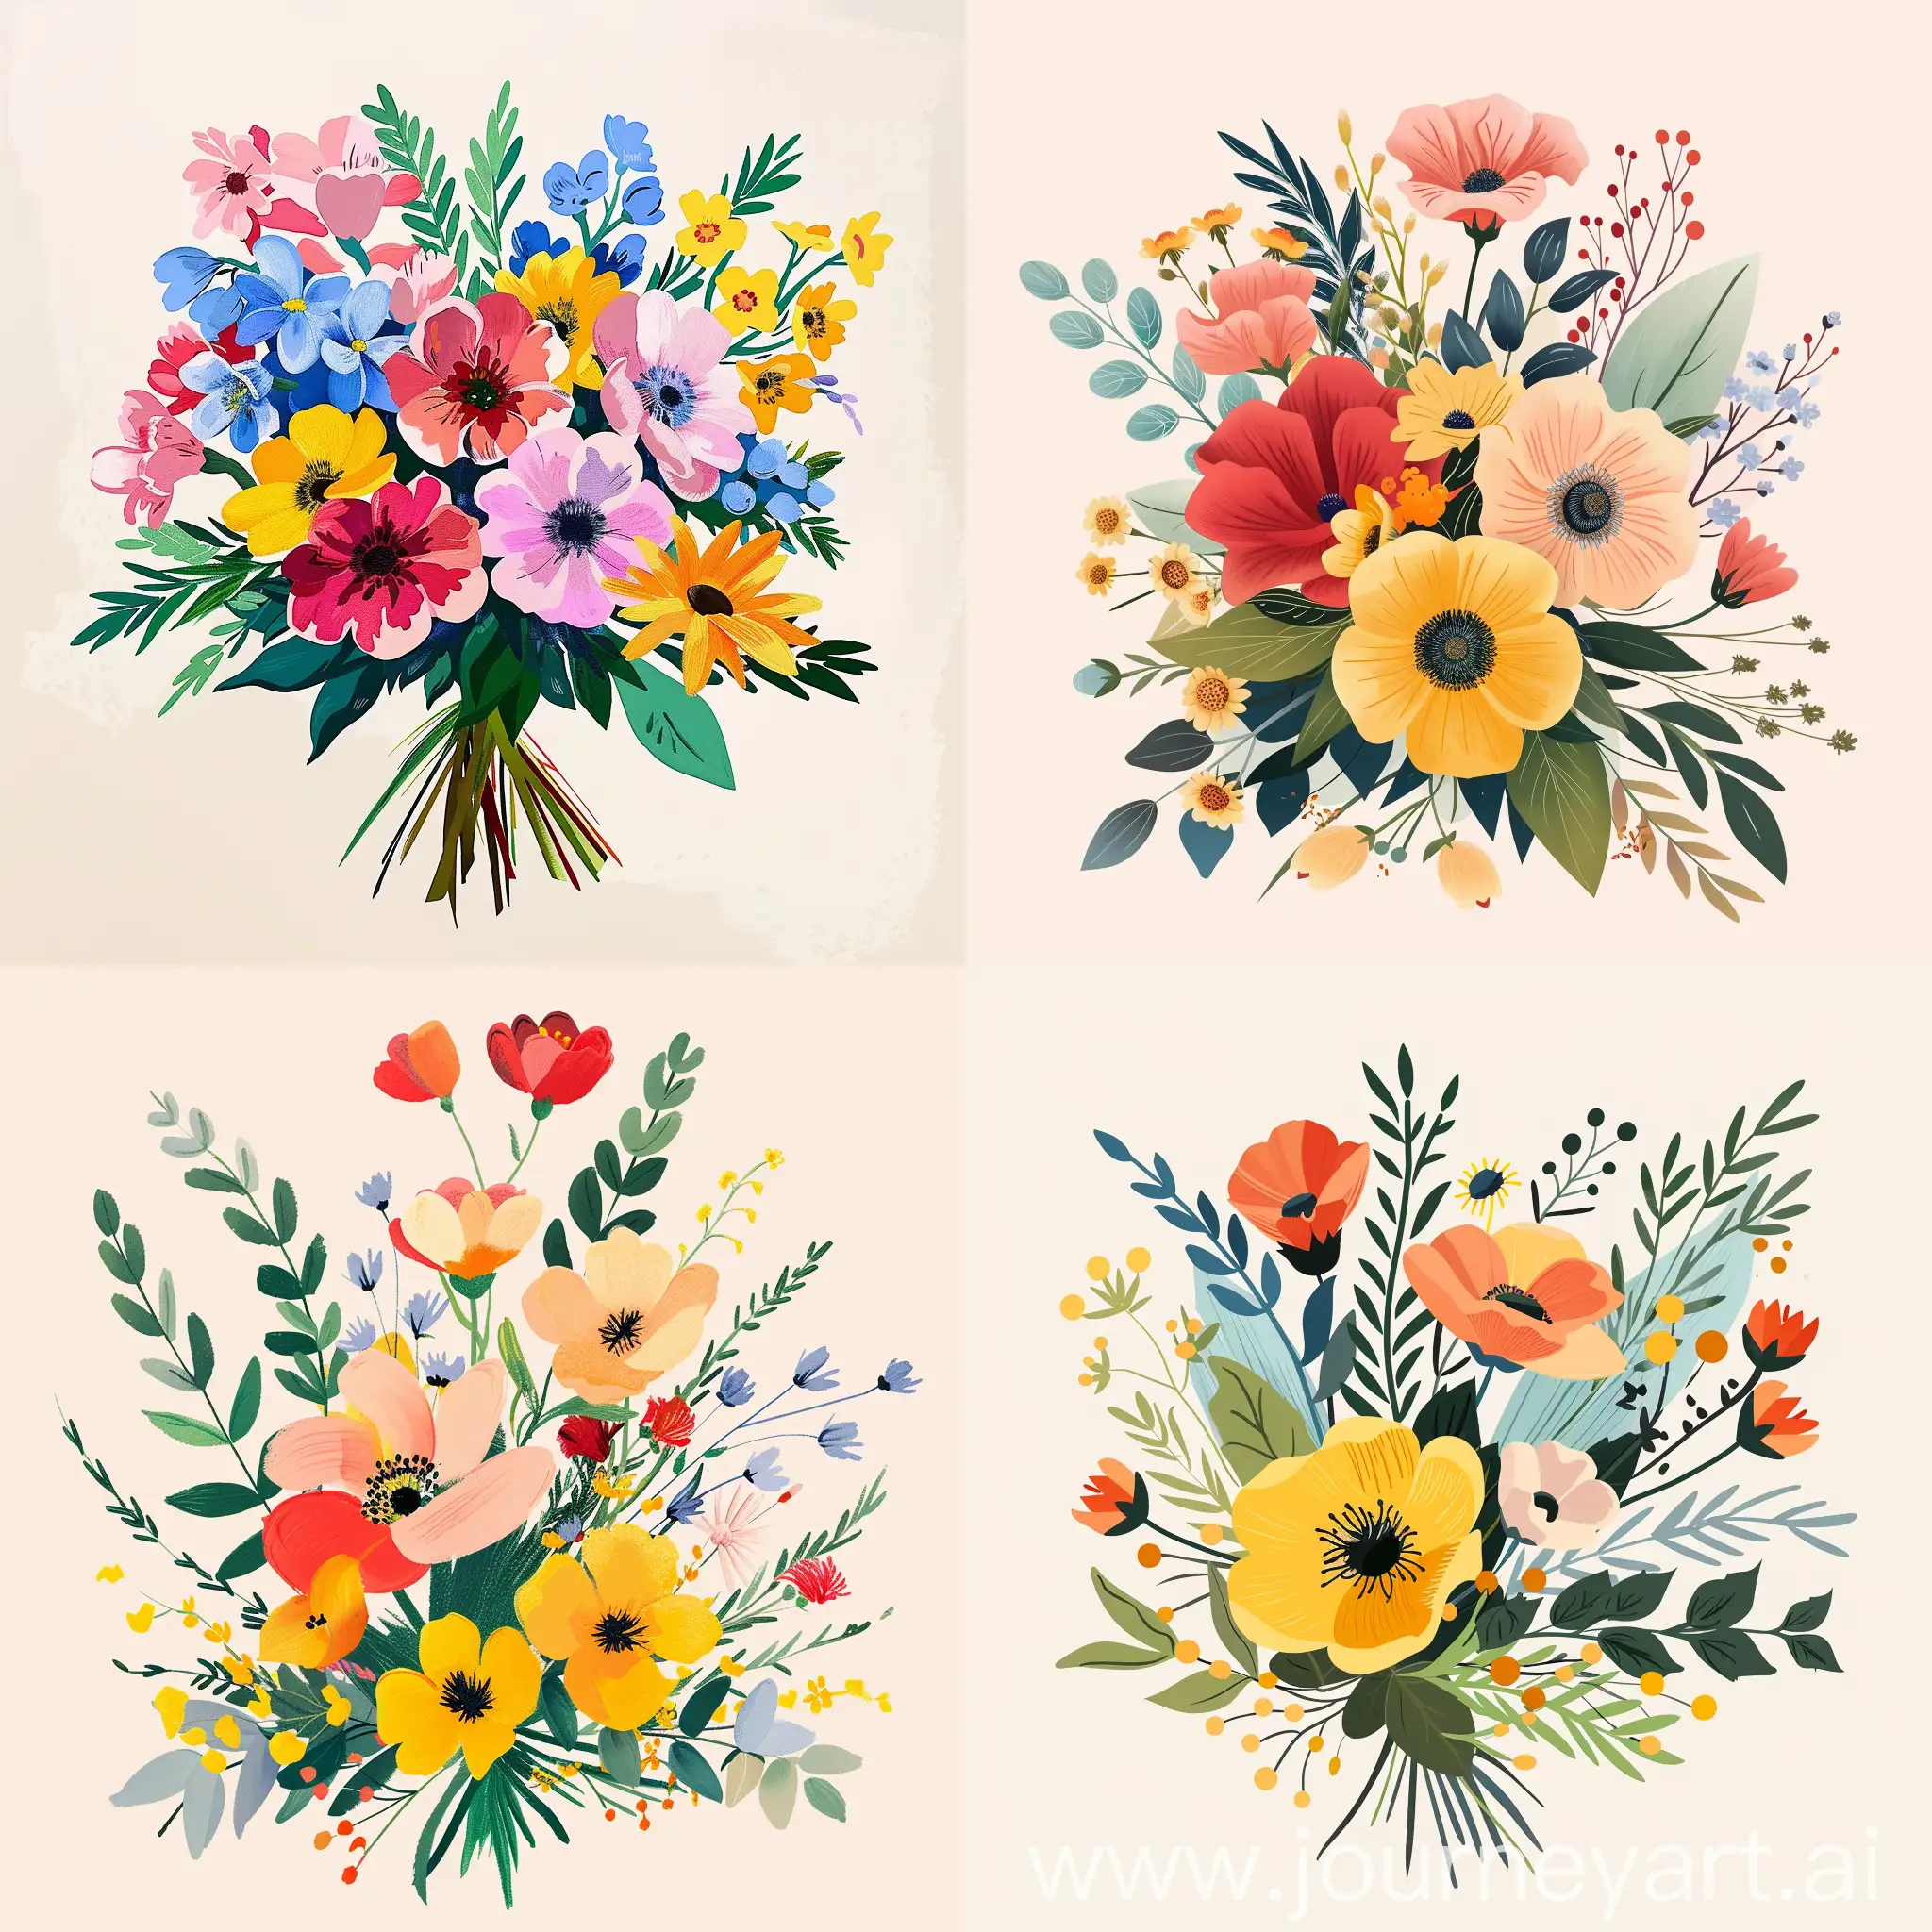 a hyper realistic flat style floral bouquet illustrated with simplified oil paint in summer colors, light background